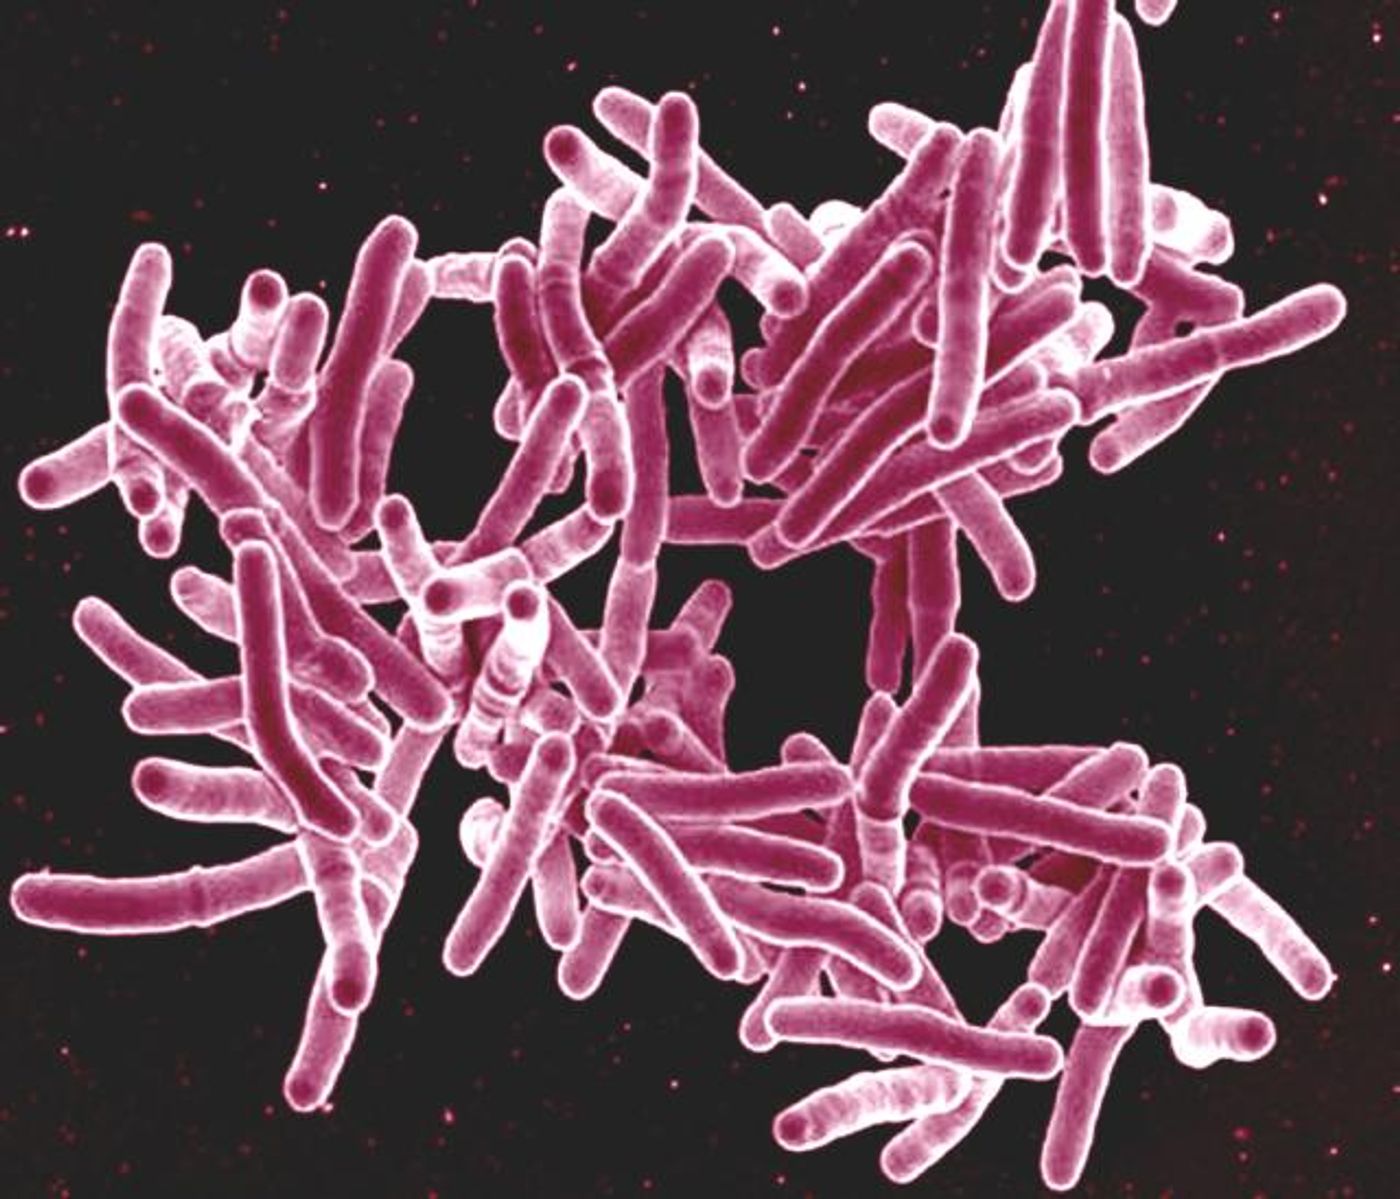 Scanning electron micrograph of Mycobacterium tuberculosis bacteria, which cause TB. / Credit: NIAID